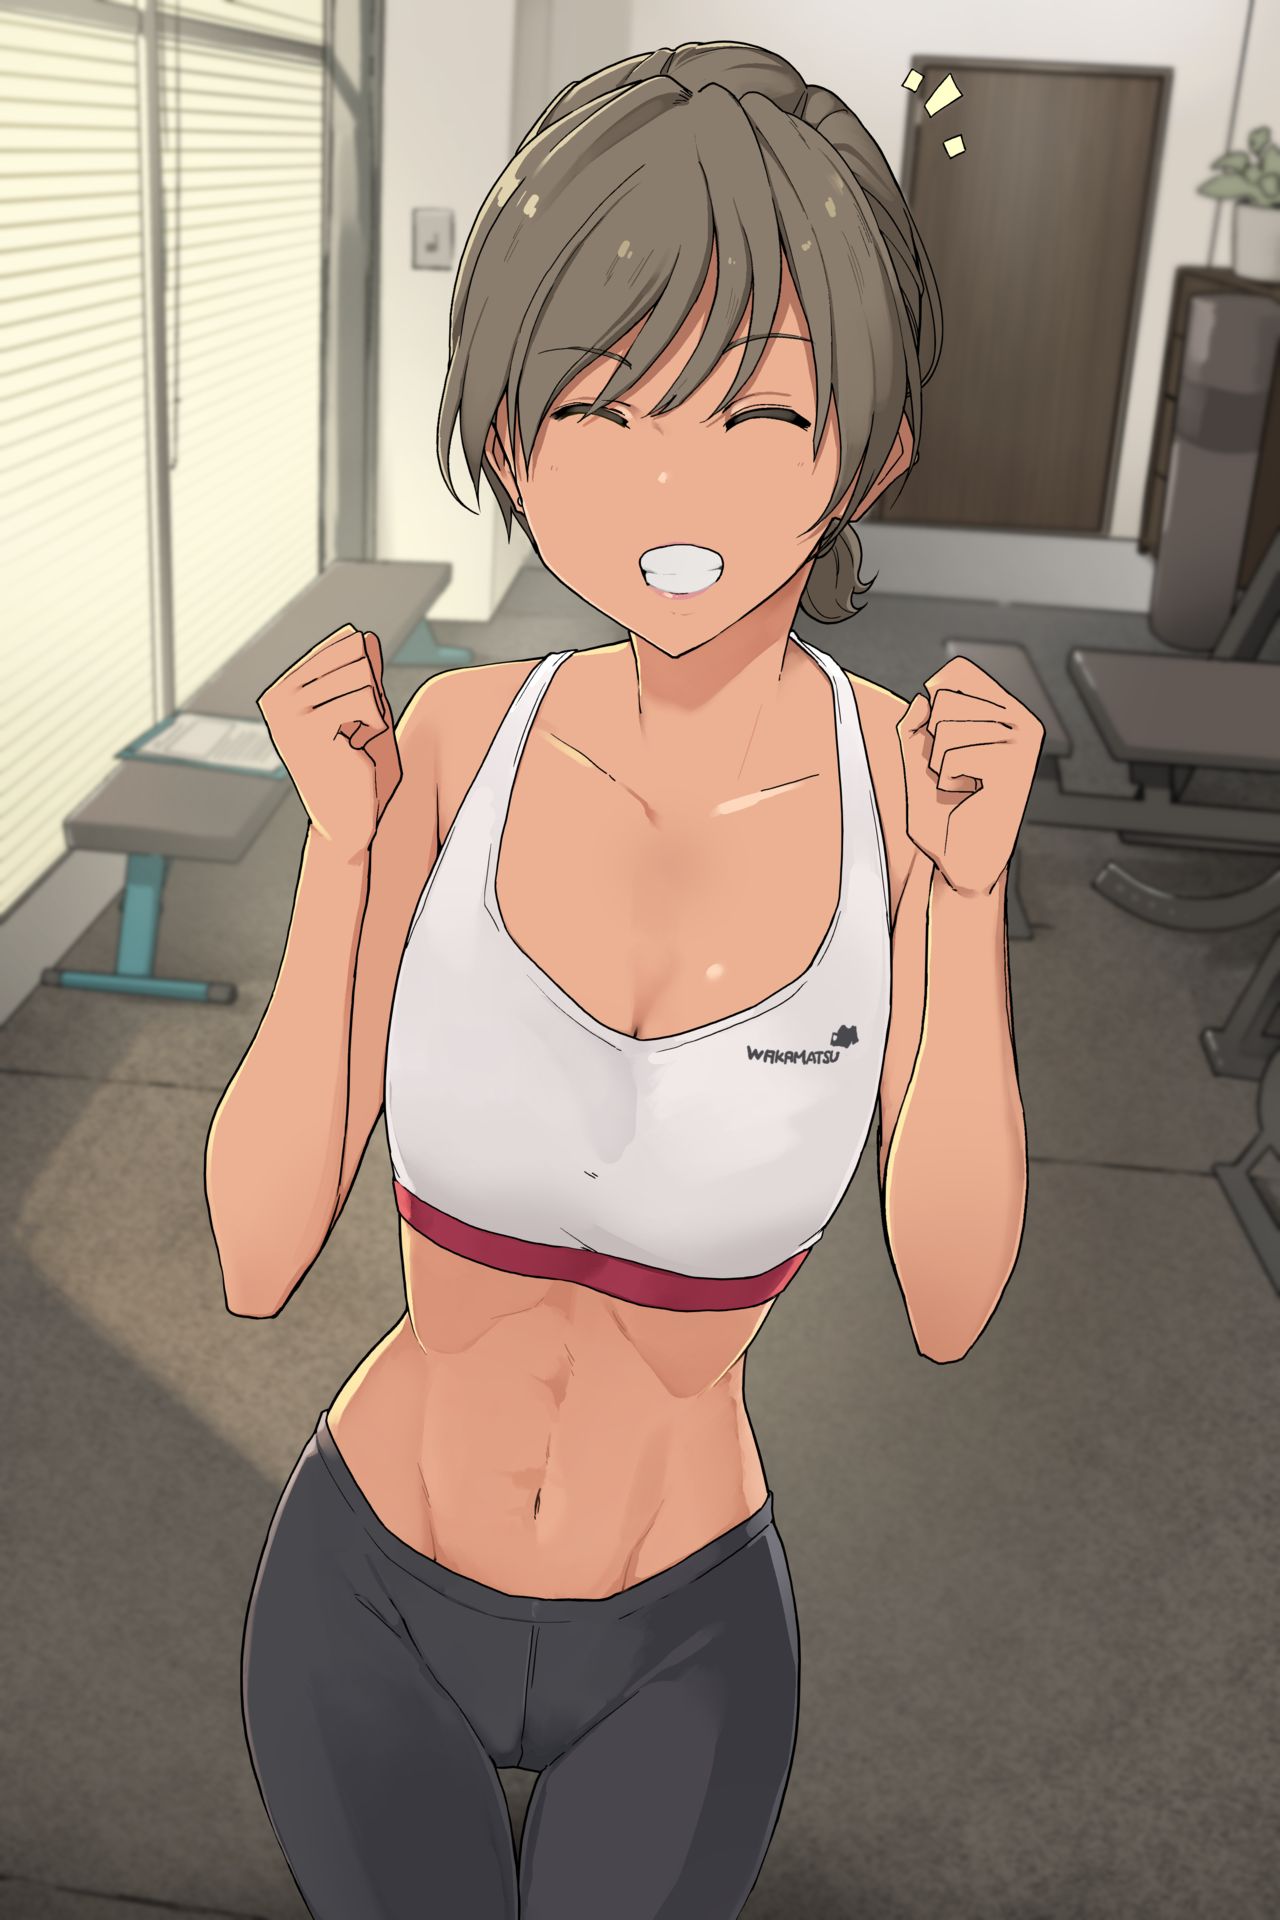 Being Bullied By A Personal Gym Trainer Wakamatsu Porn Comic